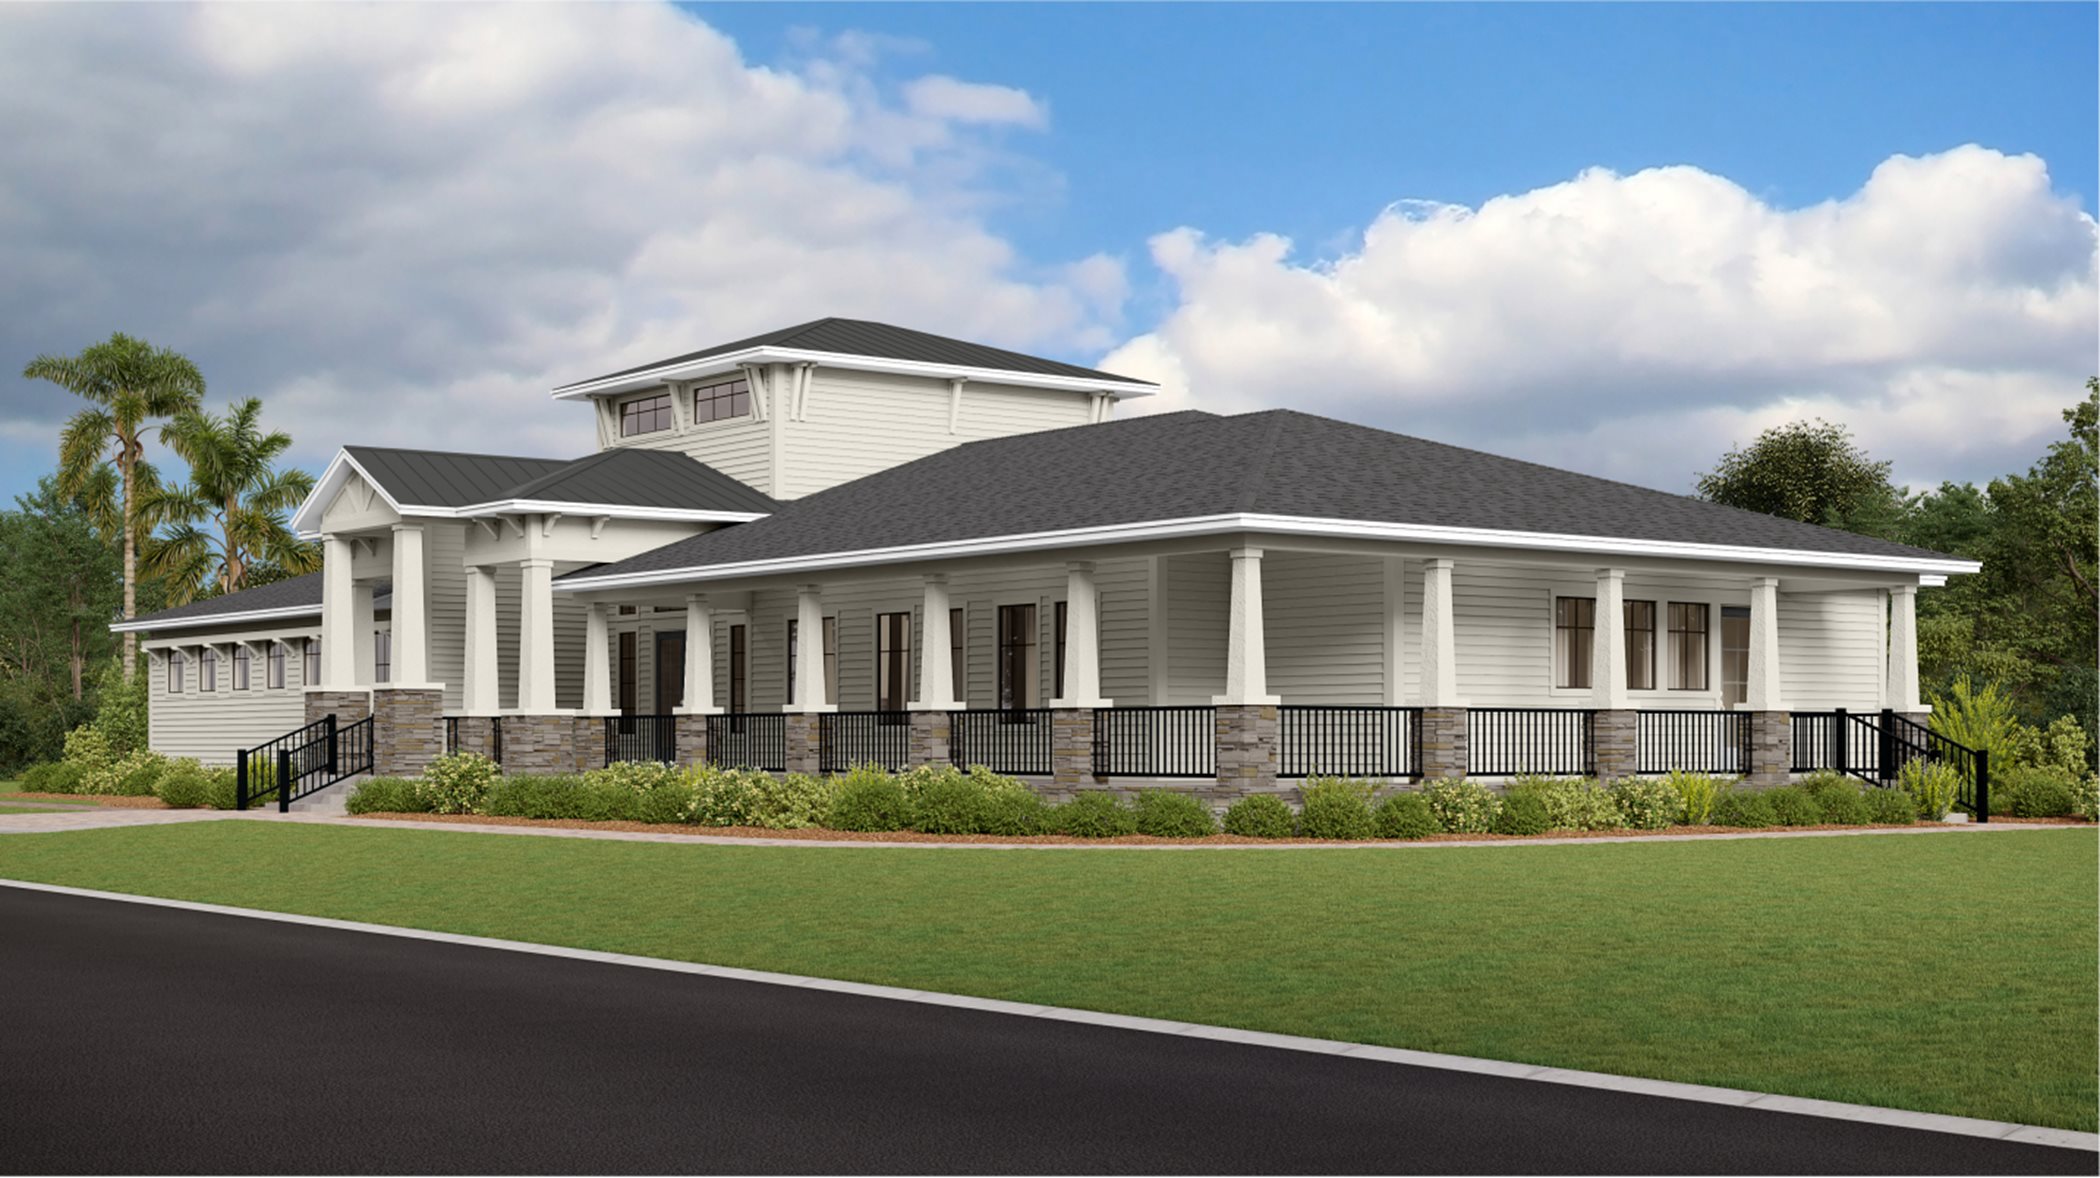 Abbott Square clubhouse rendering